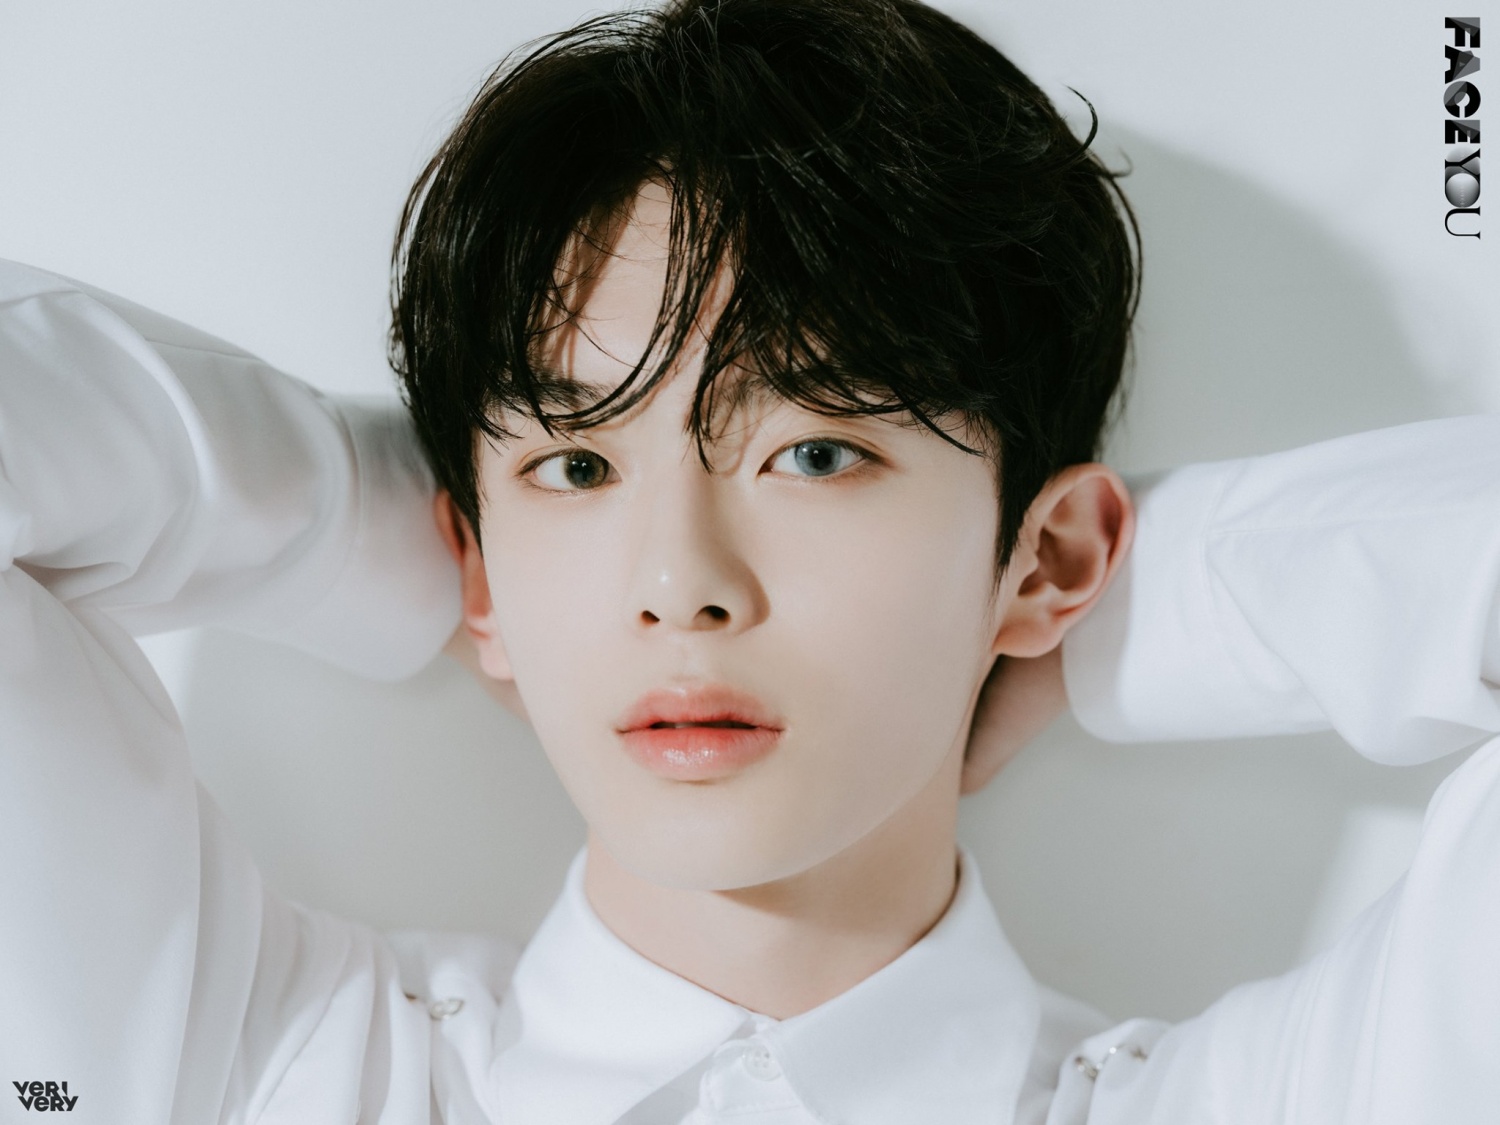 Verivery 'FACE YOU' official photo released